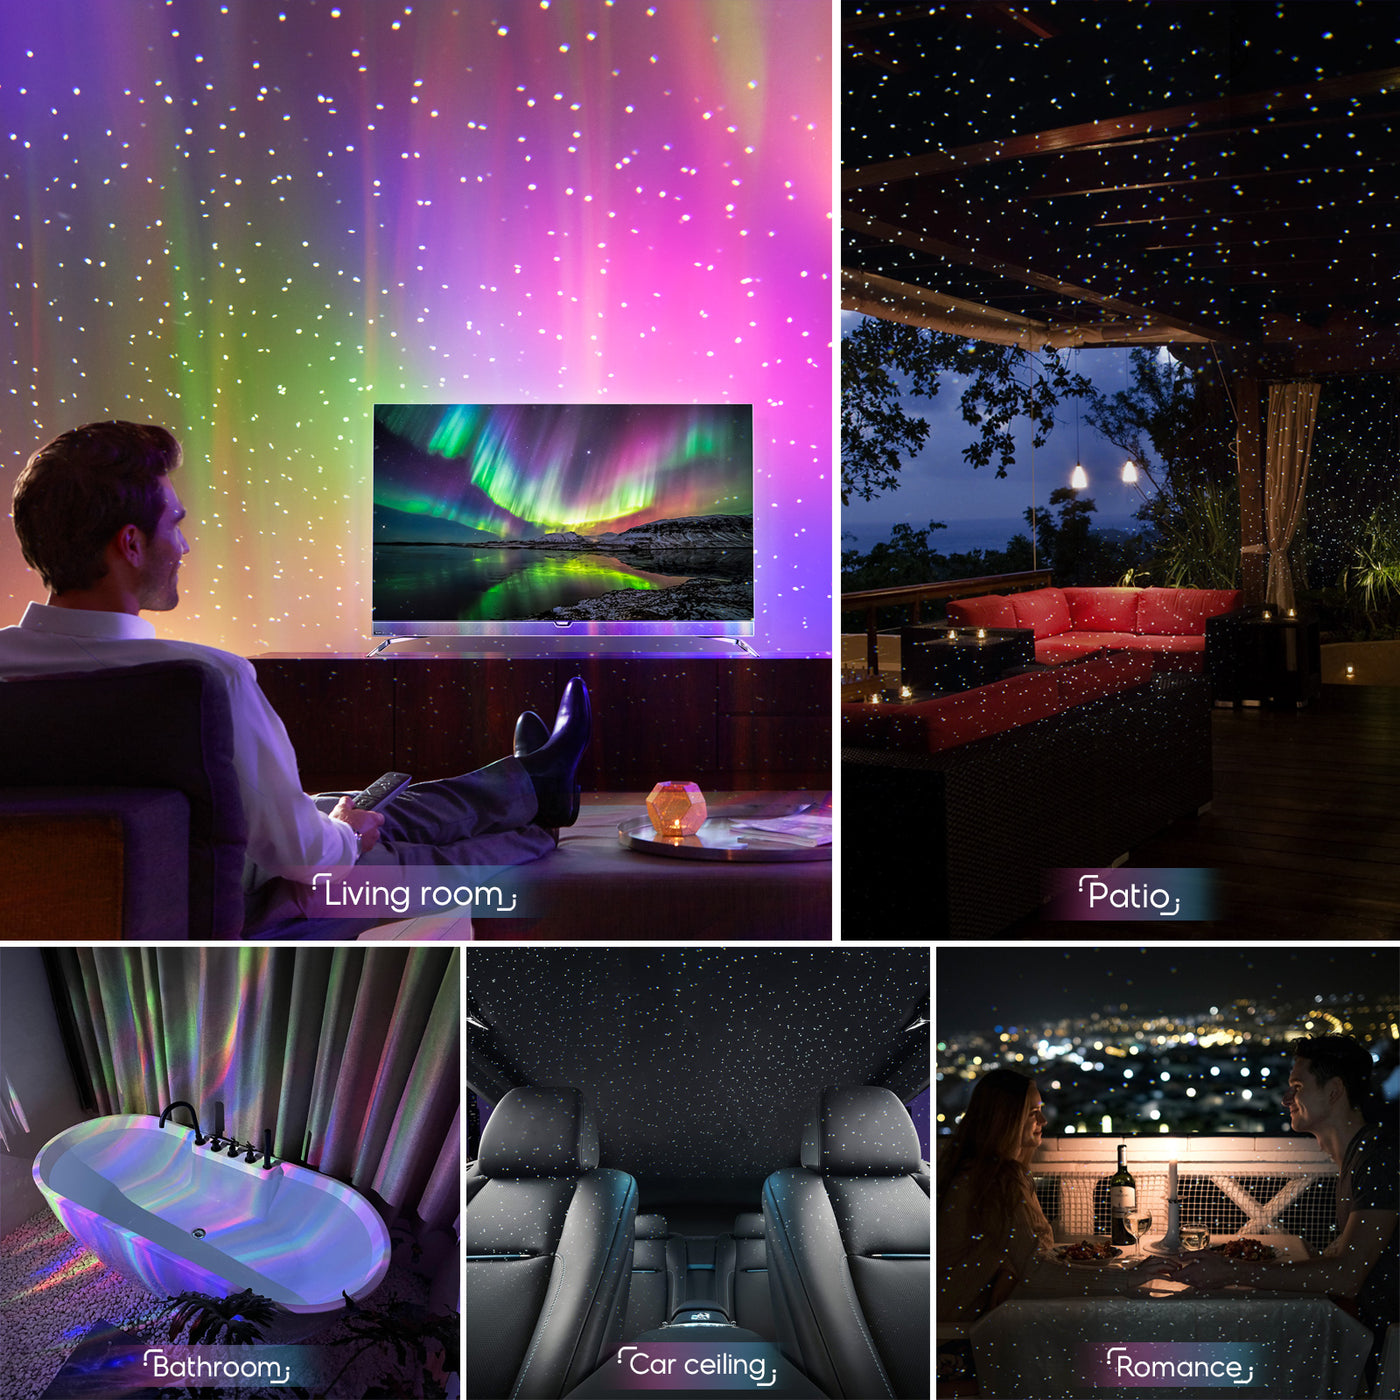 UZZO ROMANTIC STAR PROJECTOR LIGHTS LAMP ASTROSTAR ASTRO STAR WITH THE – I  Want Home & Kitchen